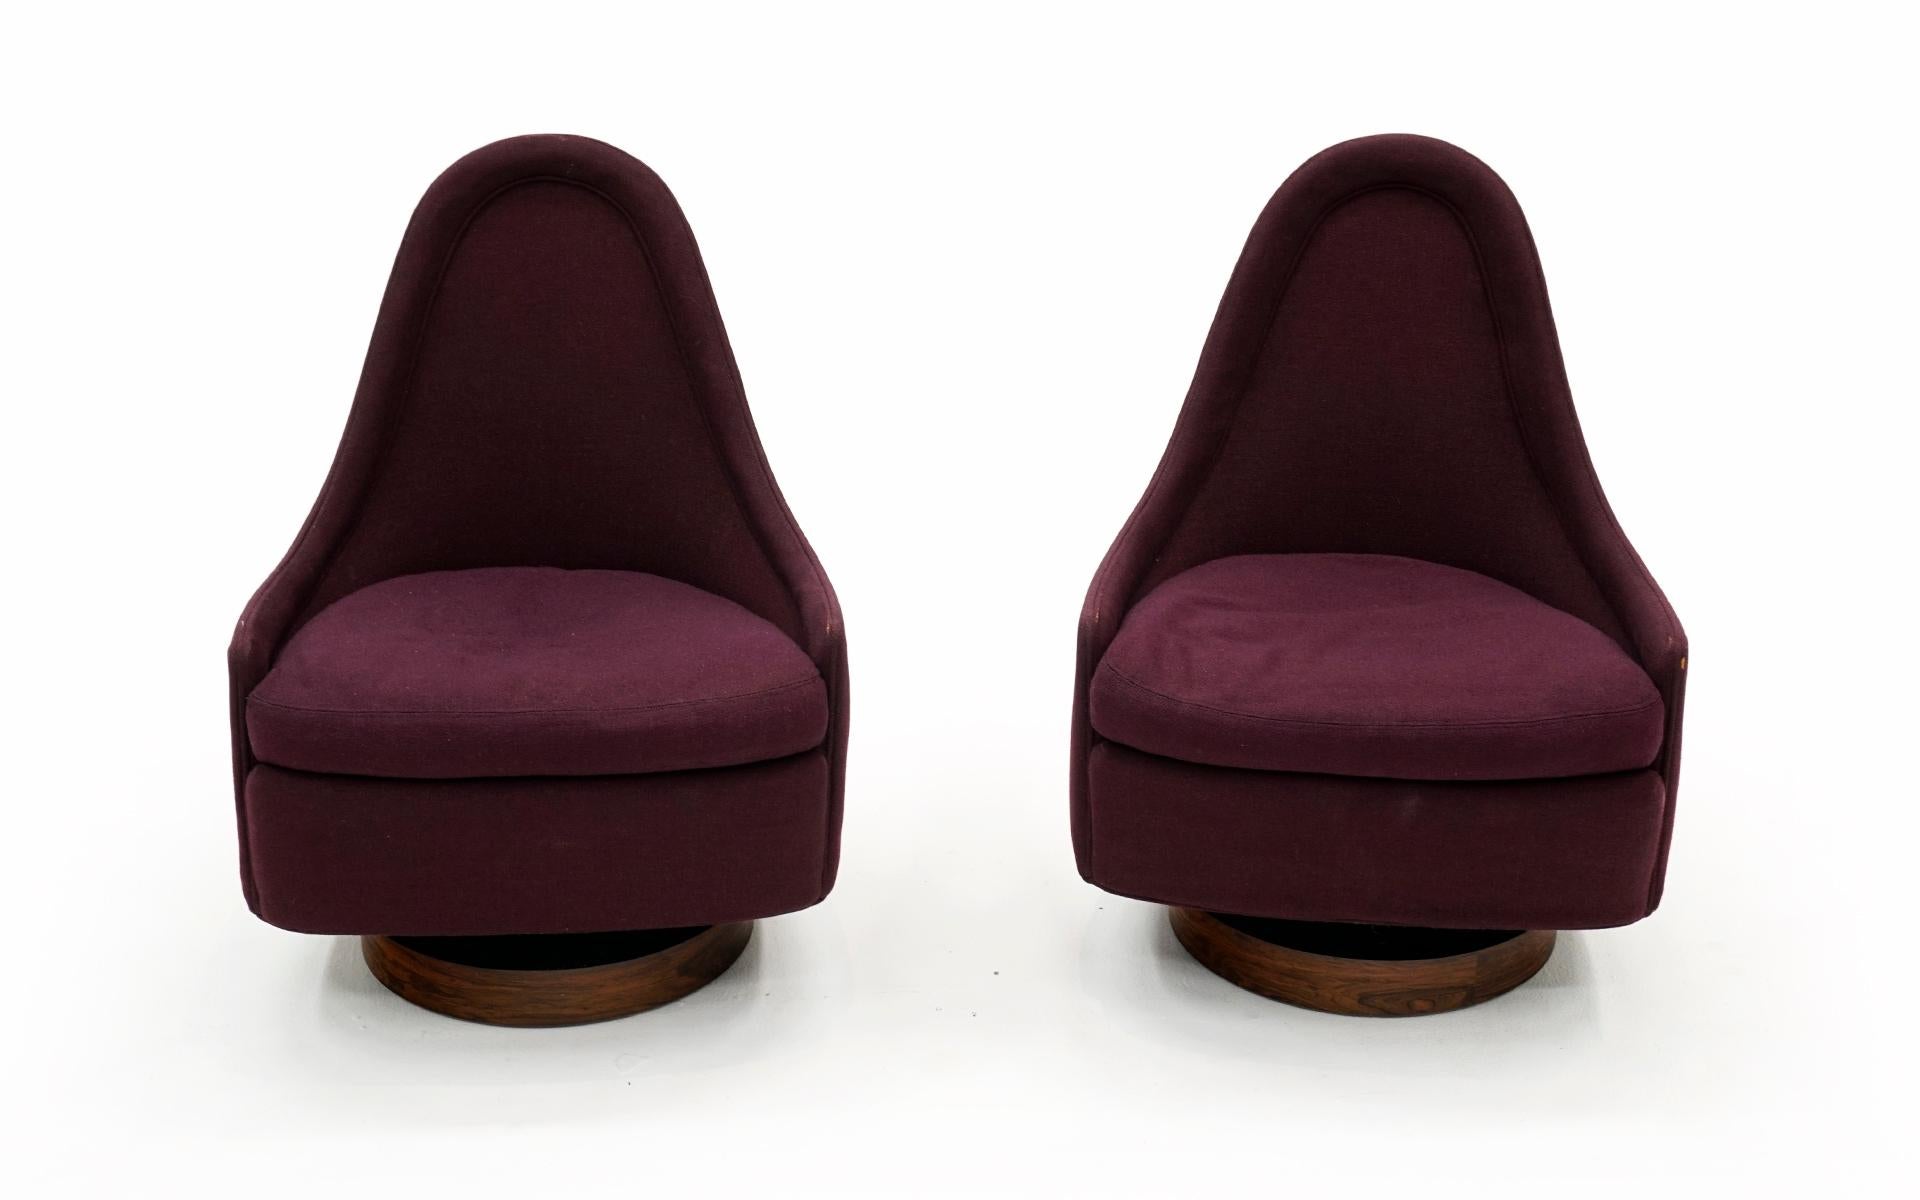 Pair of small / petite rocking swivel chairs designed by Milo Baughman for Thayer Coggin. Rare and highly desirable design made even more rare with Brazilian rosewood bases. Both retain the original Thayer Coggin labels. Chairs are in excellent